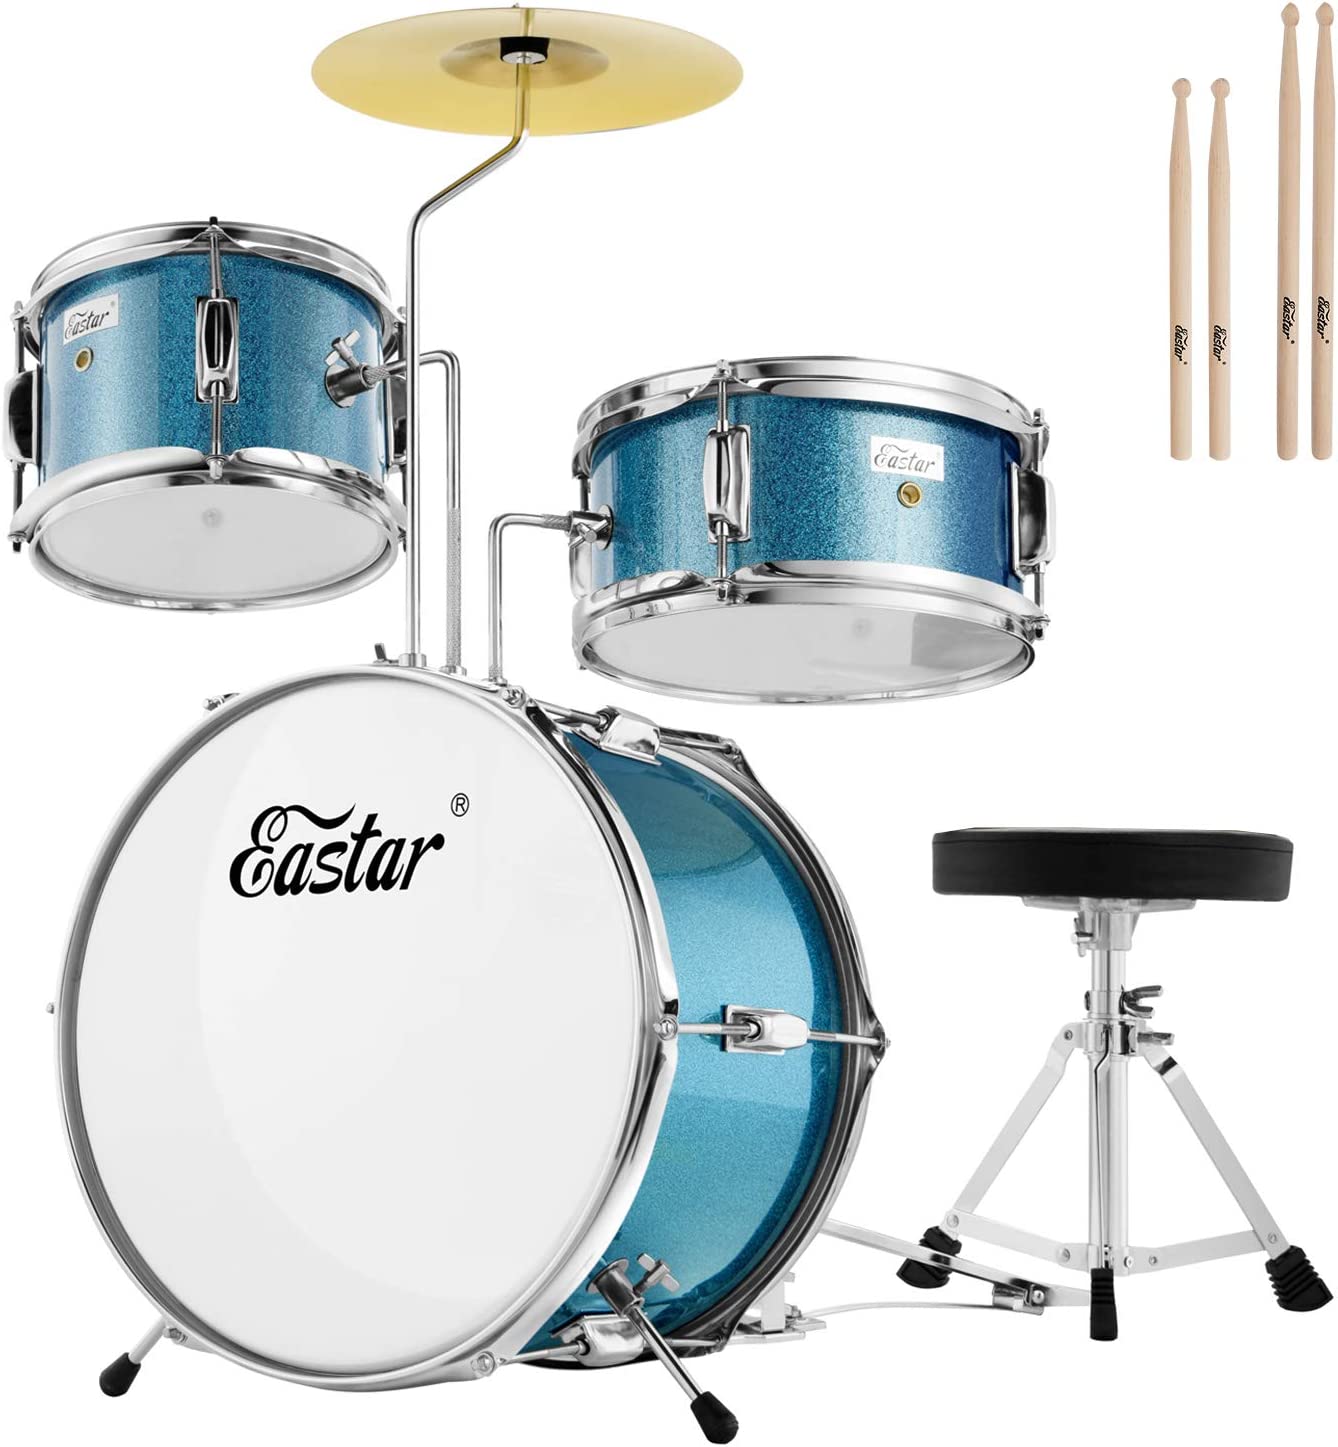 Eastar 3 Piece Kids Drum Set For Ages 3 to 6 years Old Review